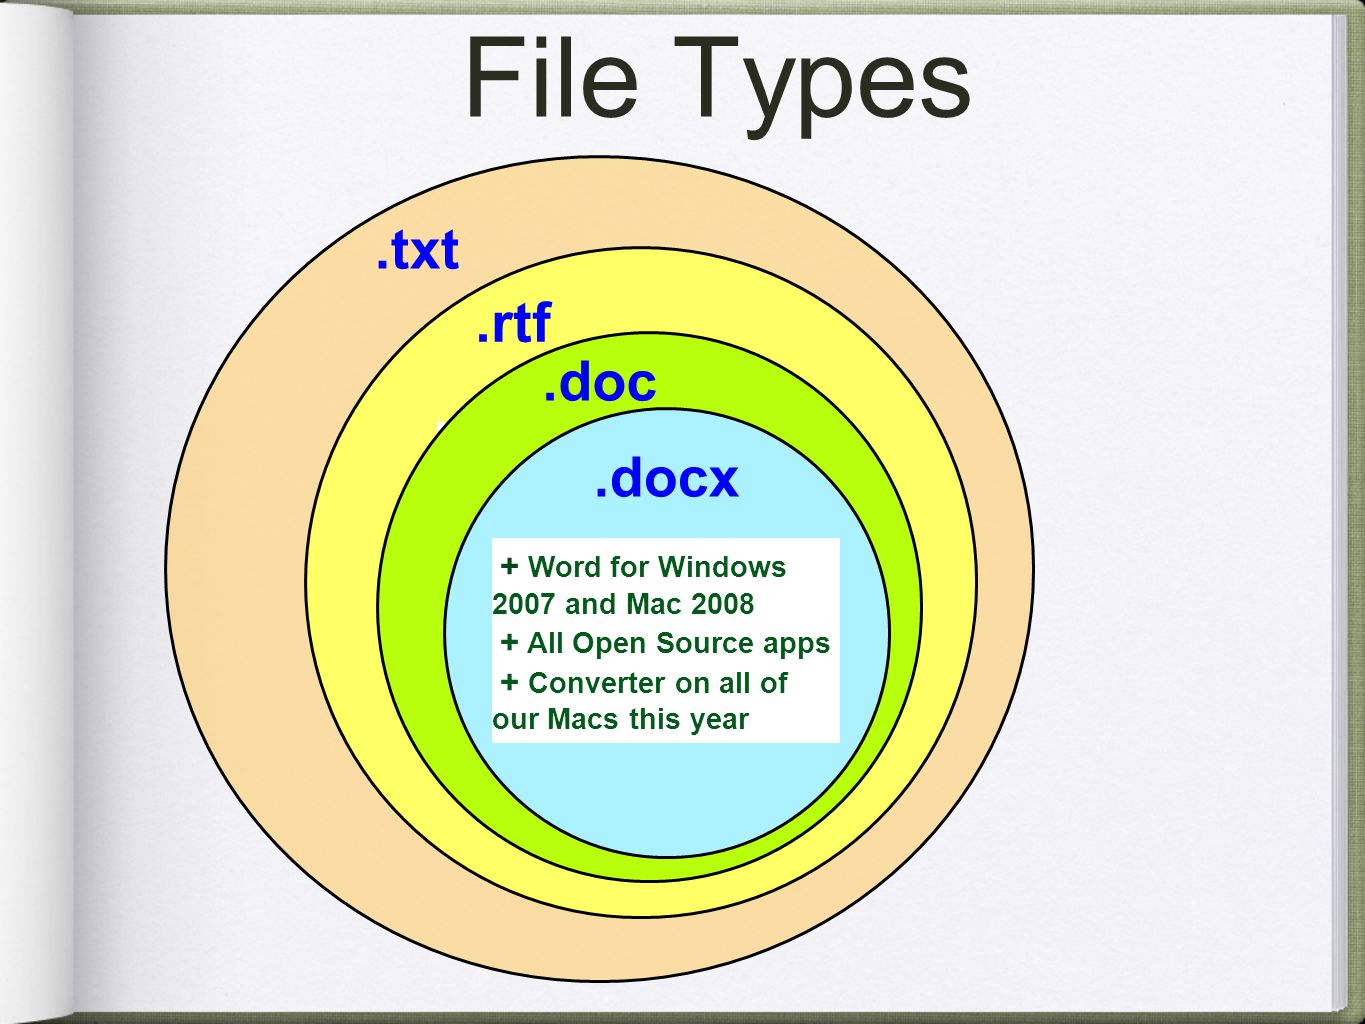 File Types.txt Sample Apps: Notepad TextEdit Stickies + Opens immediately + Every word processor in the world can read it - No formatting available.txt.rtf Rich Text Format + Retains most of the formatting + Most word processors can read - Tables, fonts might be lost Sample Apps: Appleworks Word Perfect All Open Source docs.doc + Microsoft Word for Windows until Microsoft Word for Mac until Nothing stays static!.docx + Word for Windows 2007 and Mac All Open Source apps + Converter on all of our Macs this year